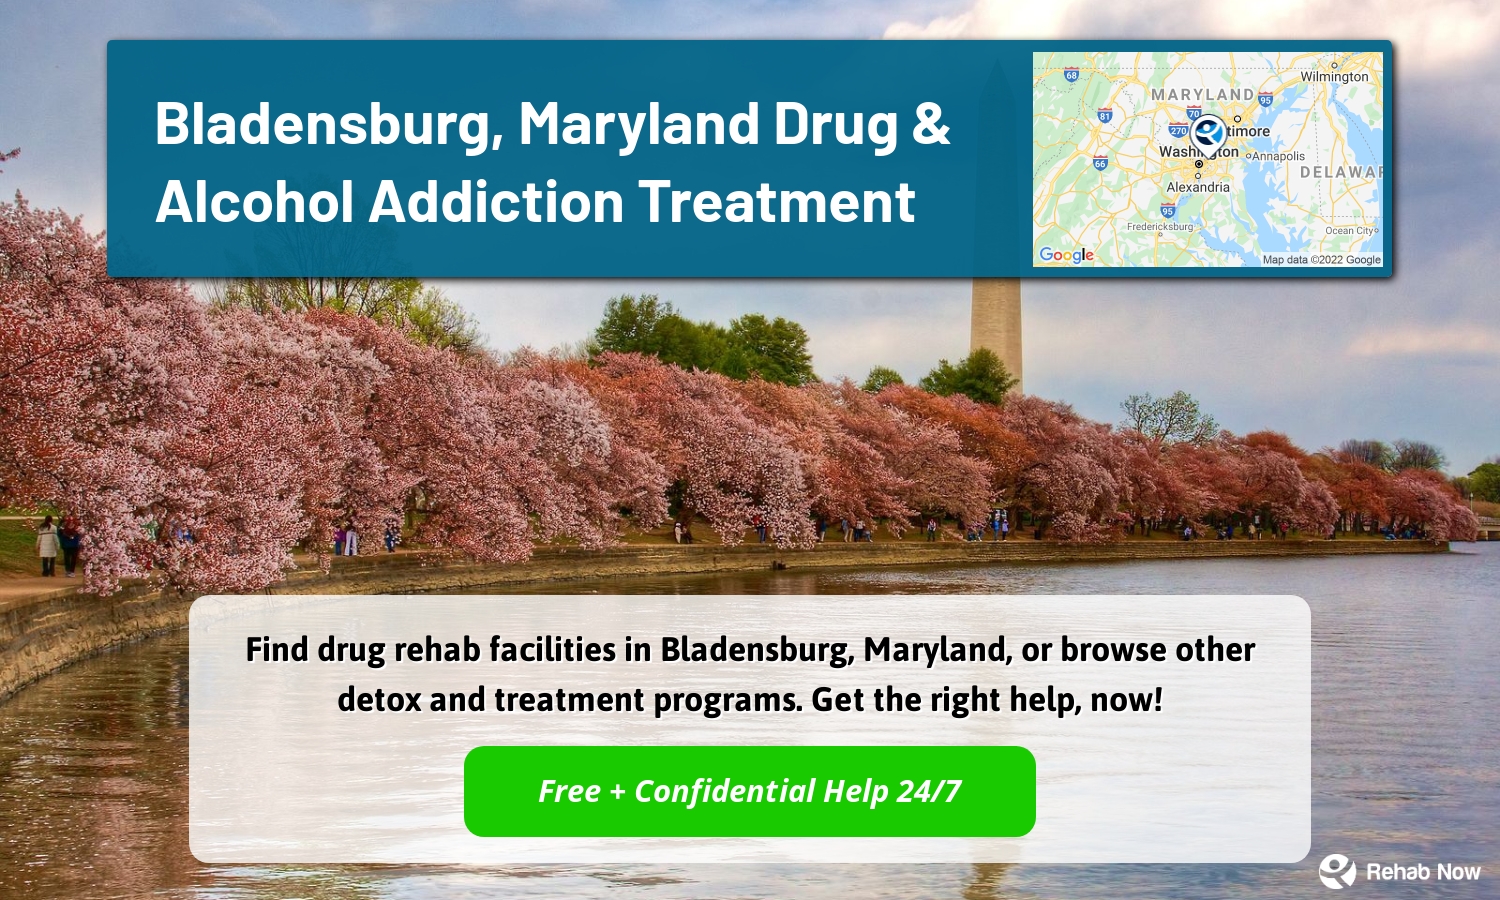 Find drug rehab facilities in Bladensburg, Maryland, or browse other detox and treatment programs. Get the right help, now!